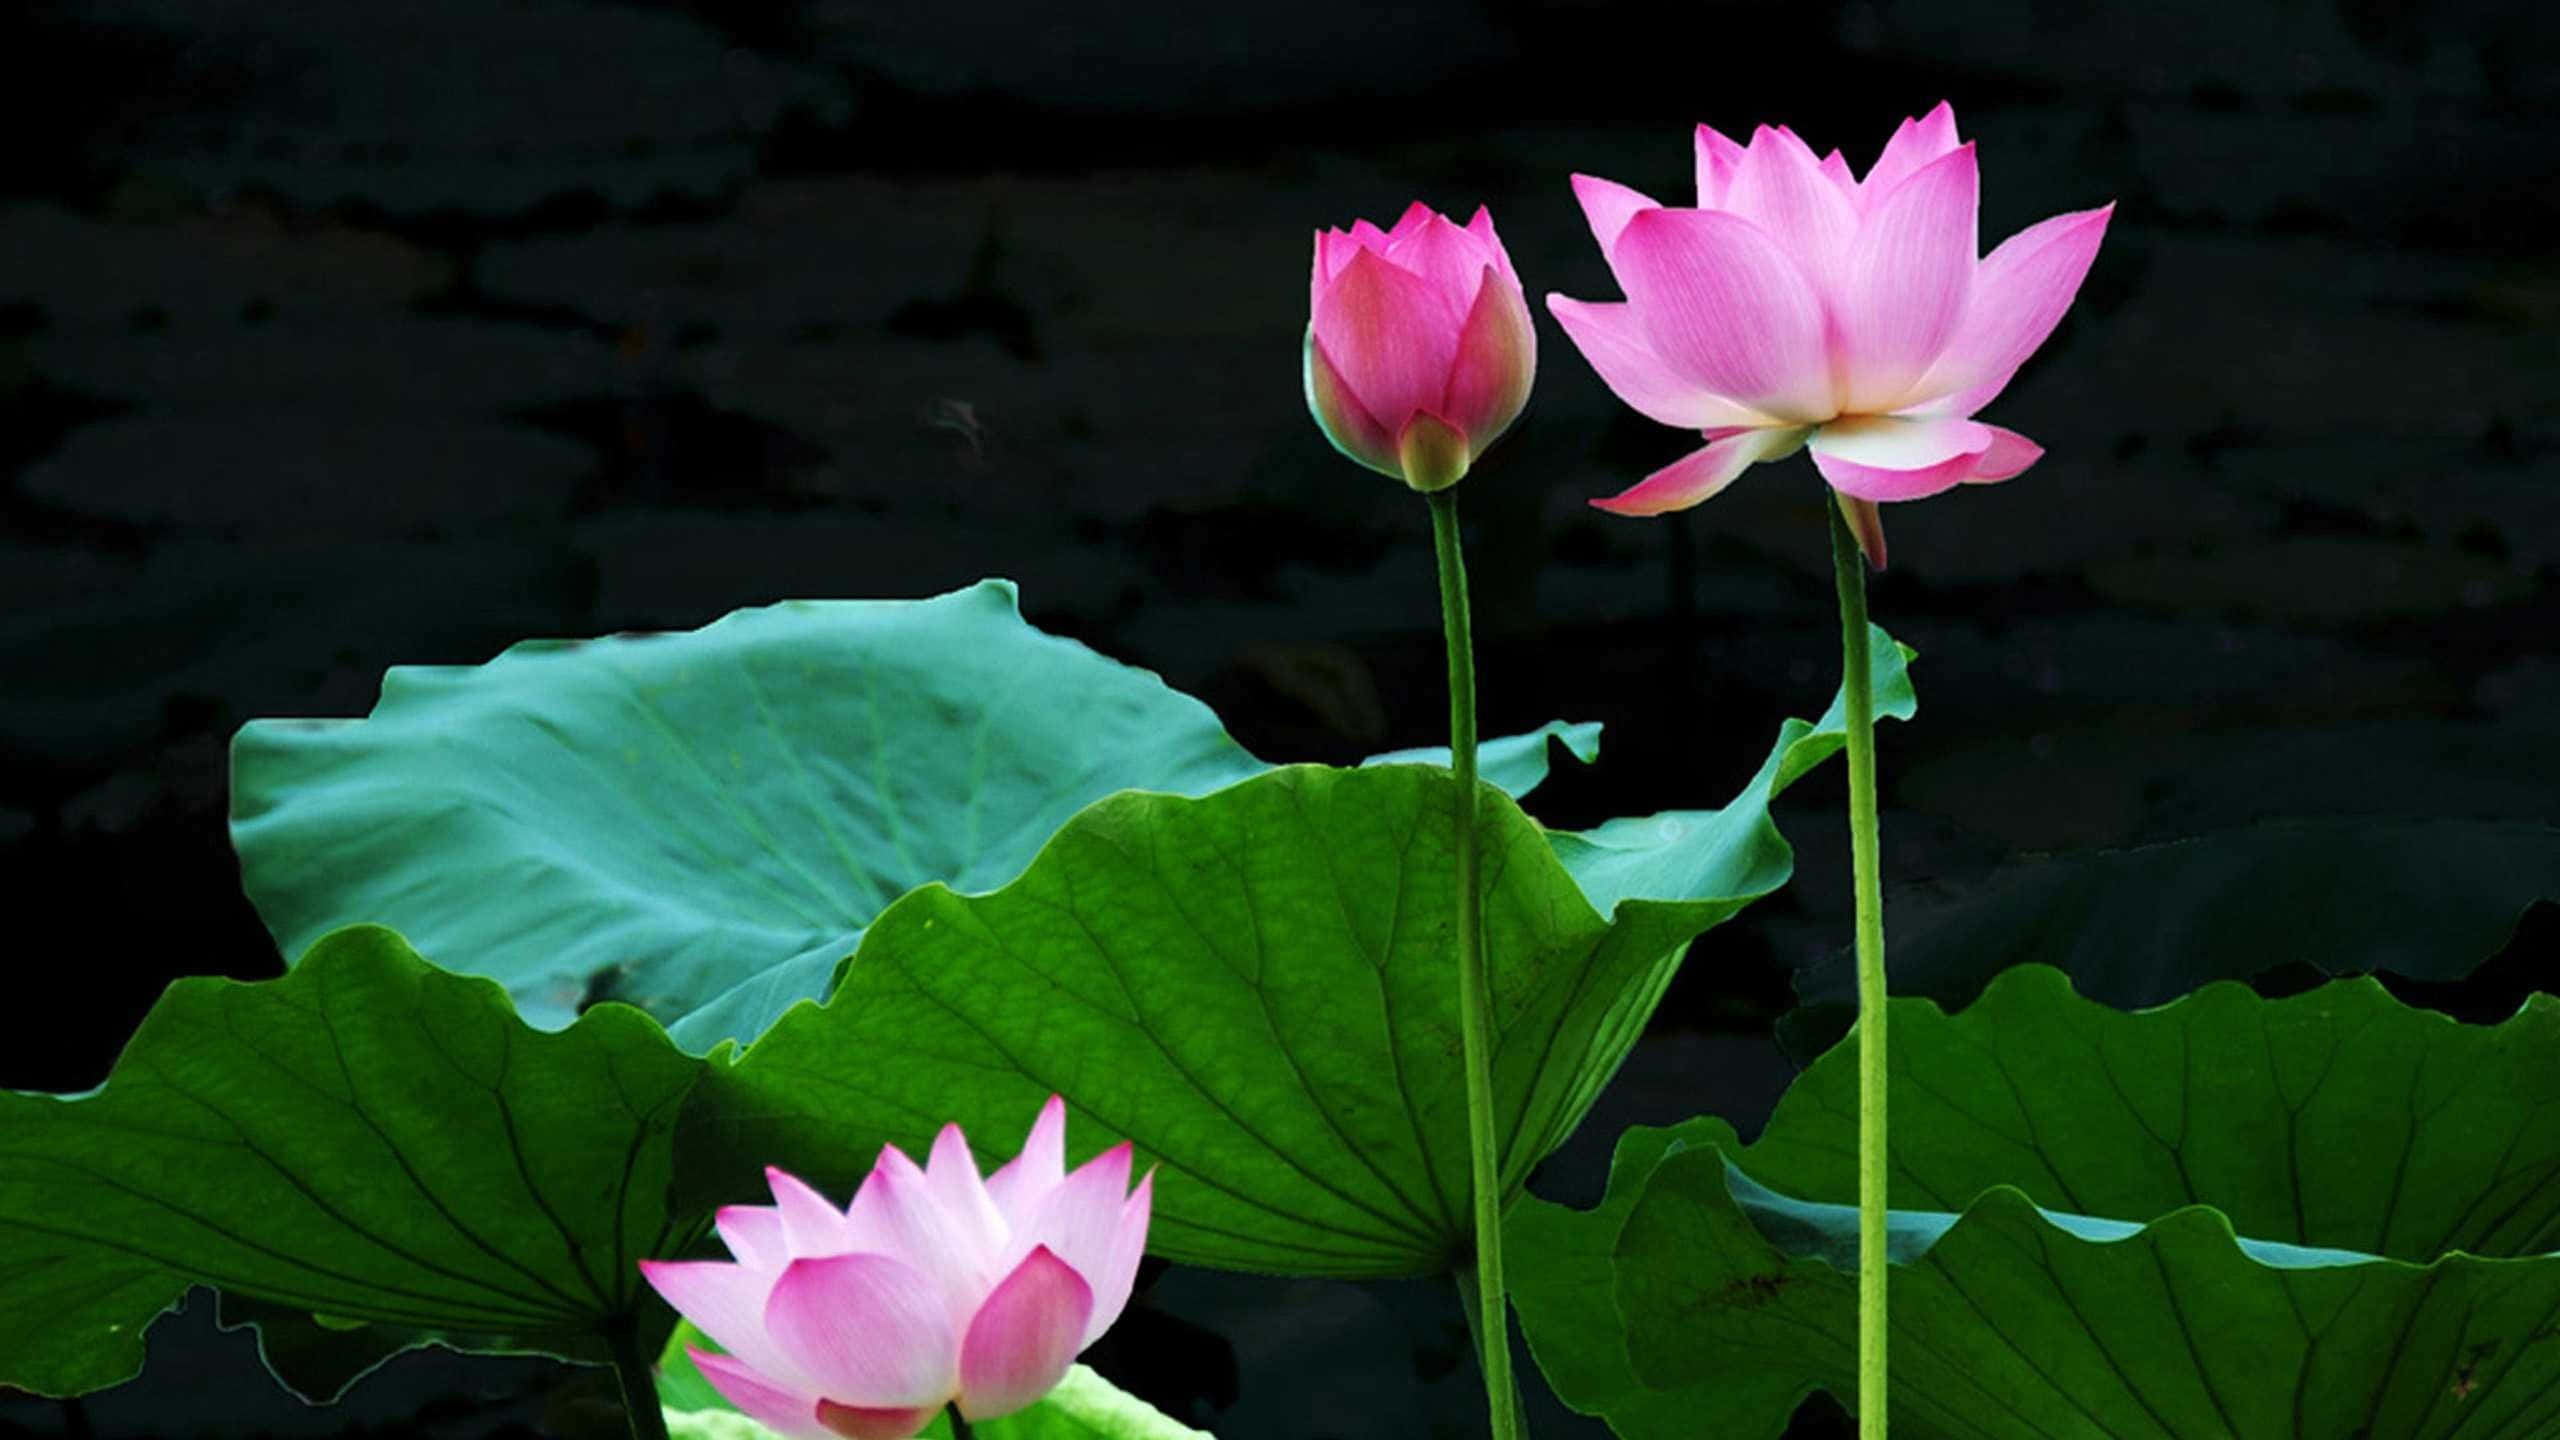 Beauty of Nature: A Blooming Lotus